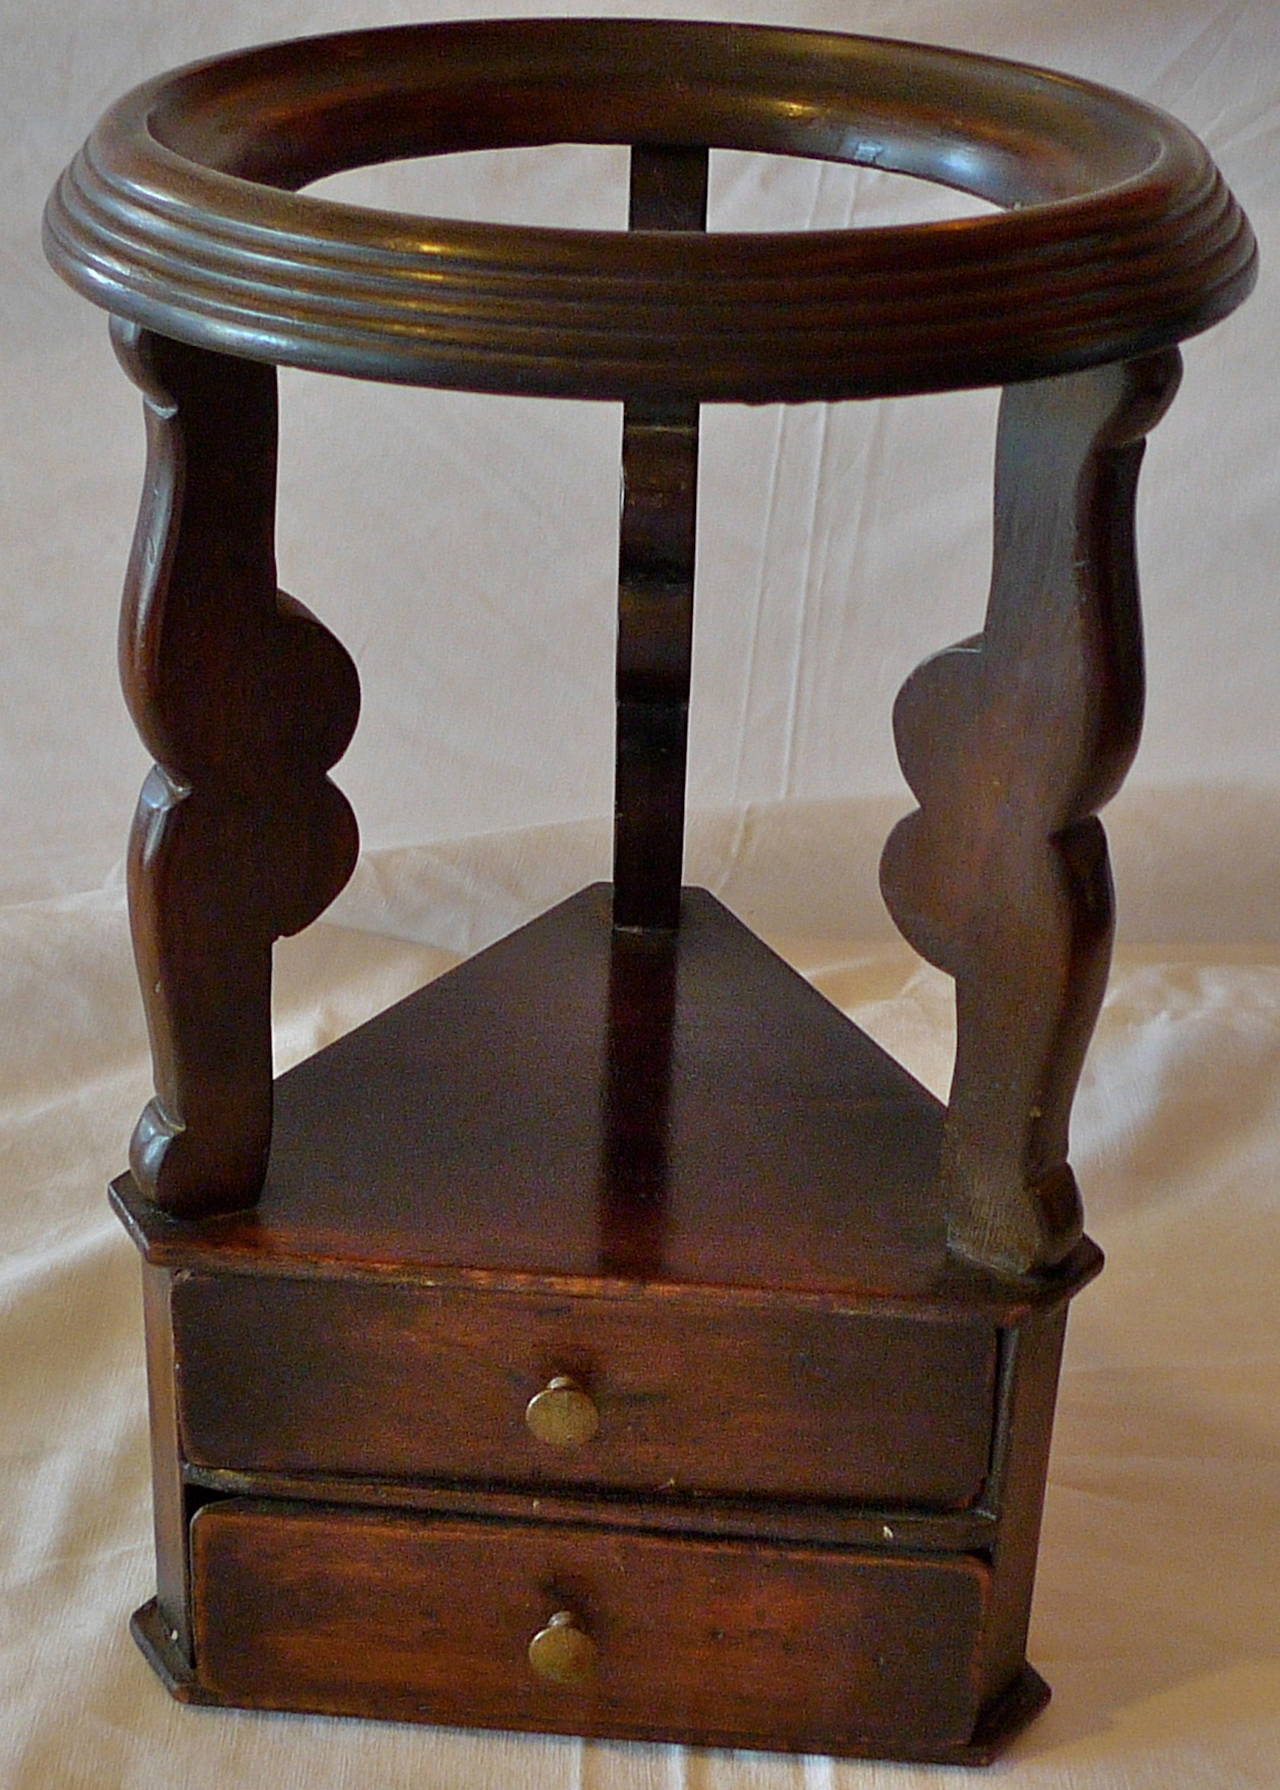 French 19th century small mahogany triangle cabinet with two drawers and round plate stand.